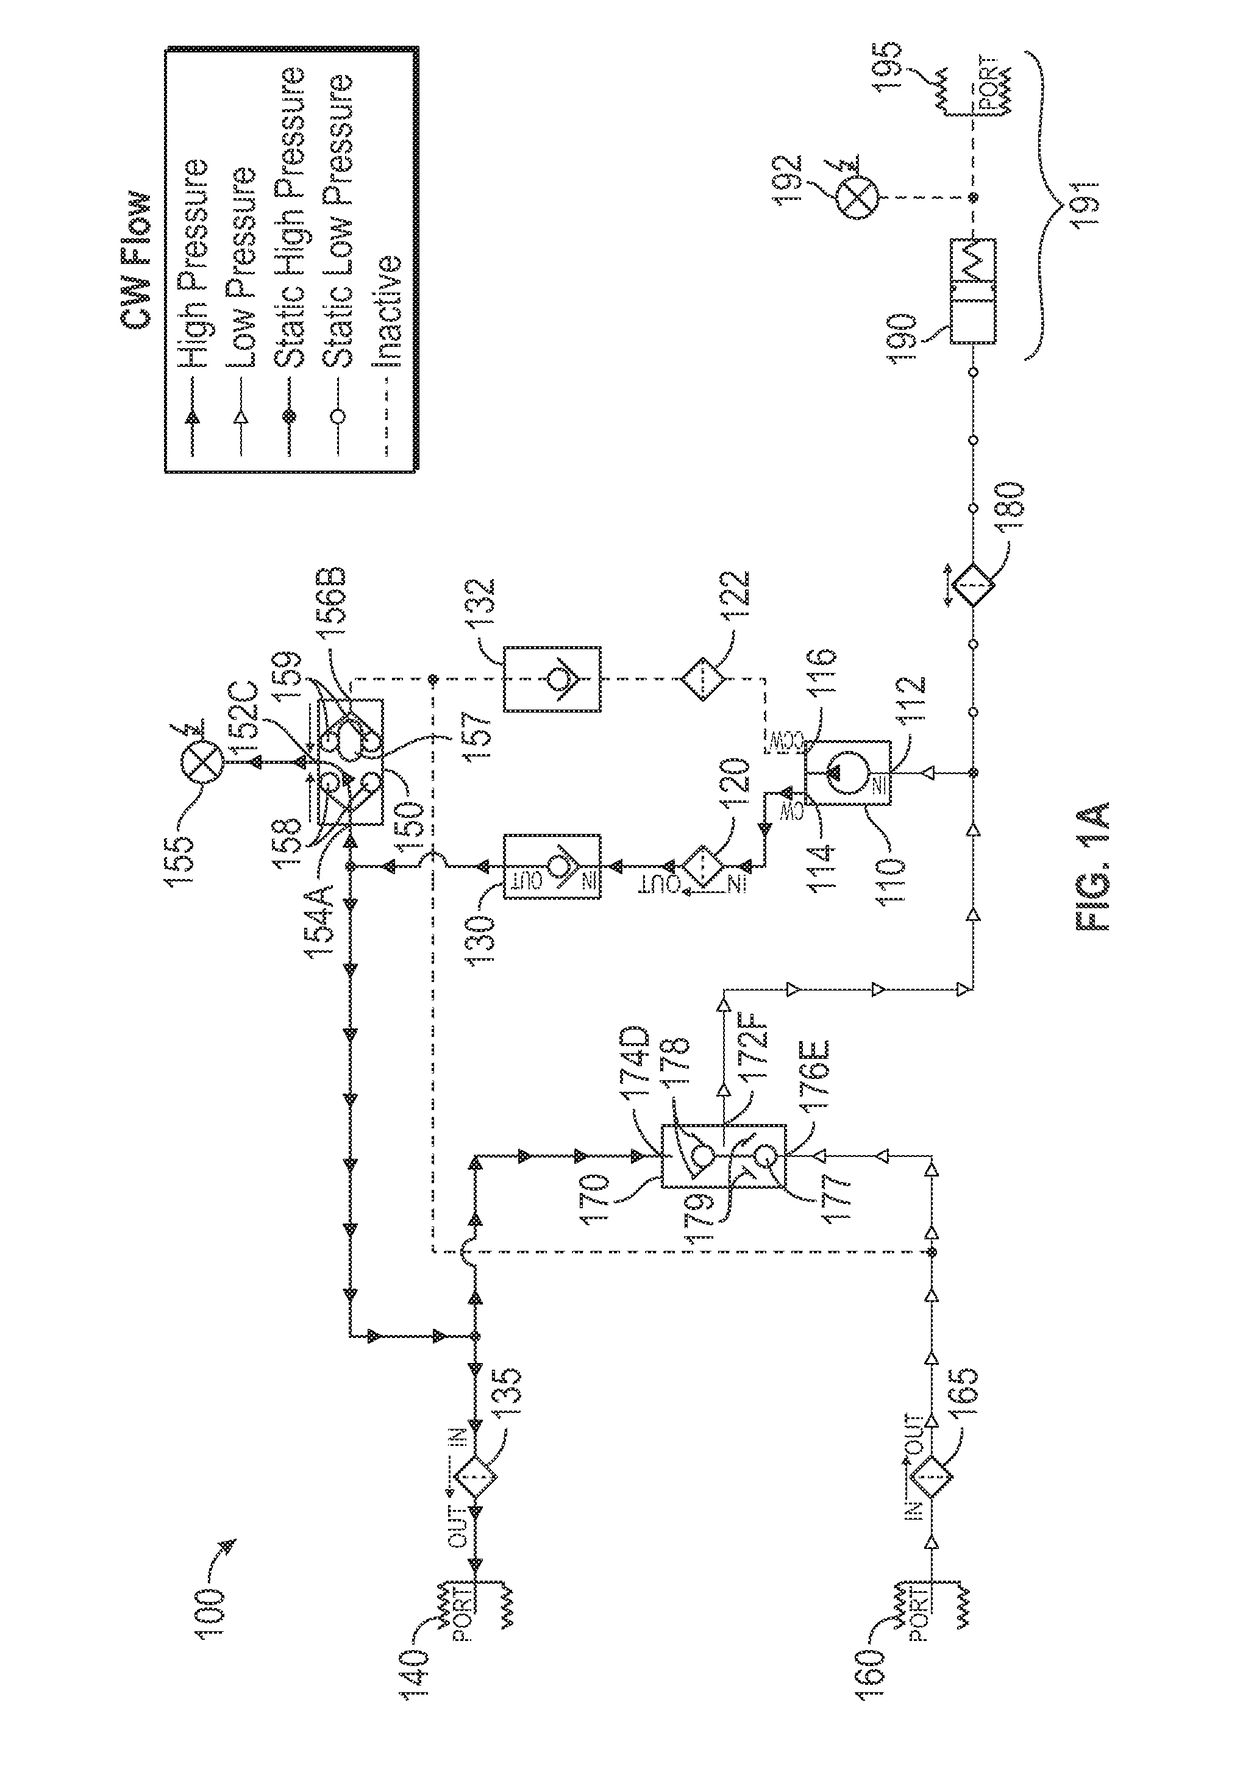 Prime Mover System and Methods Utilizing Balanced Flow within Bi-Directional Power Units